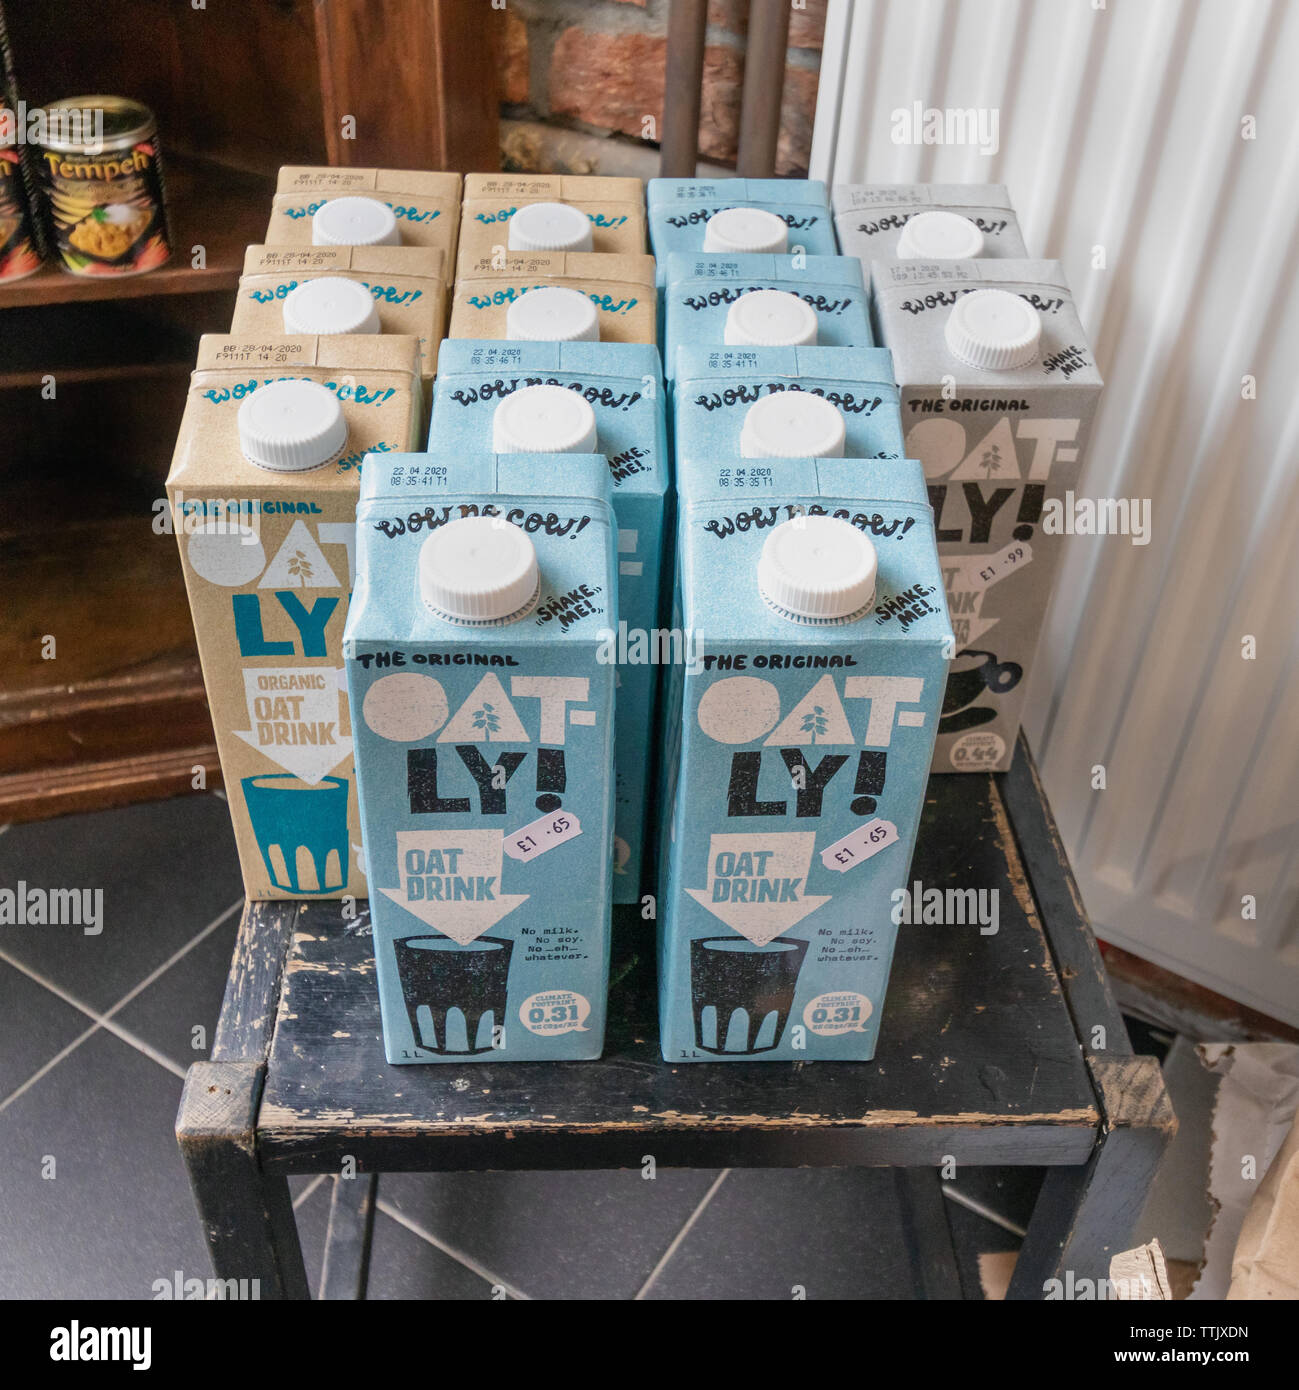 London / UK - June 15th 2019 - Collection of Oatley cartons of an oat drink milk alternative Stock Photo